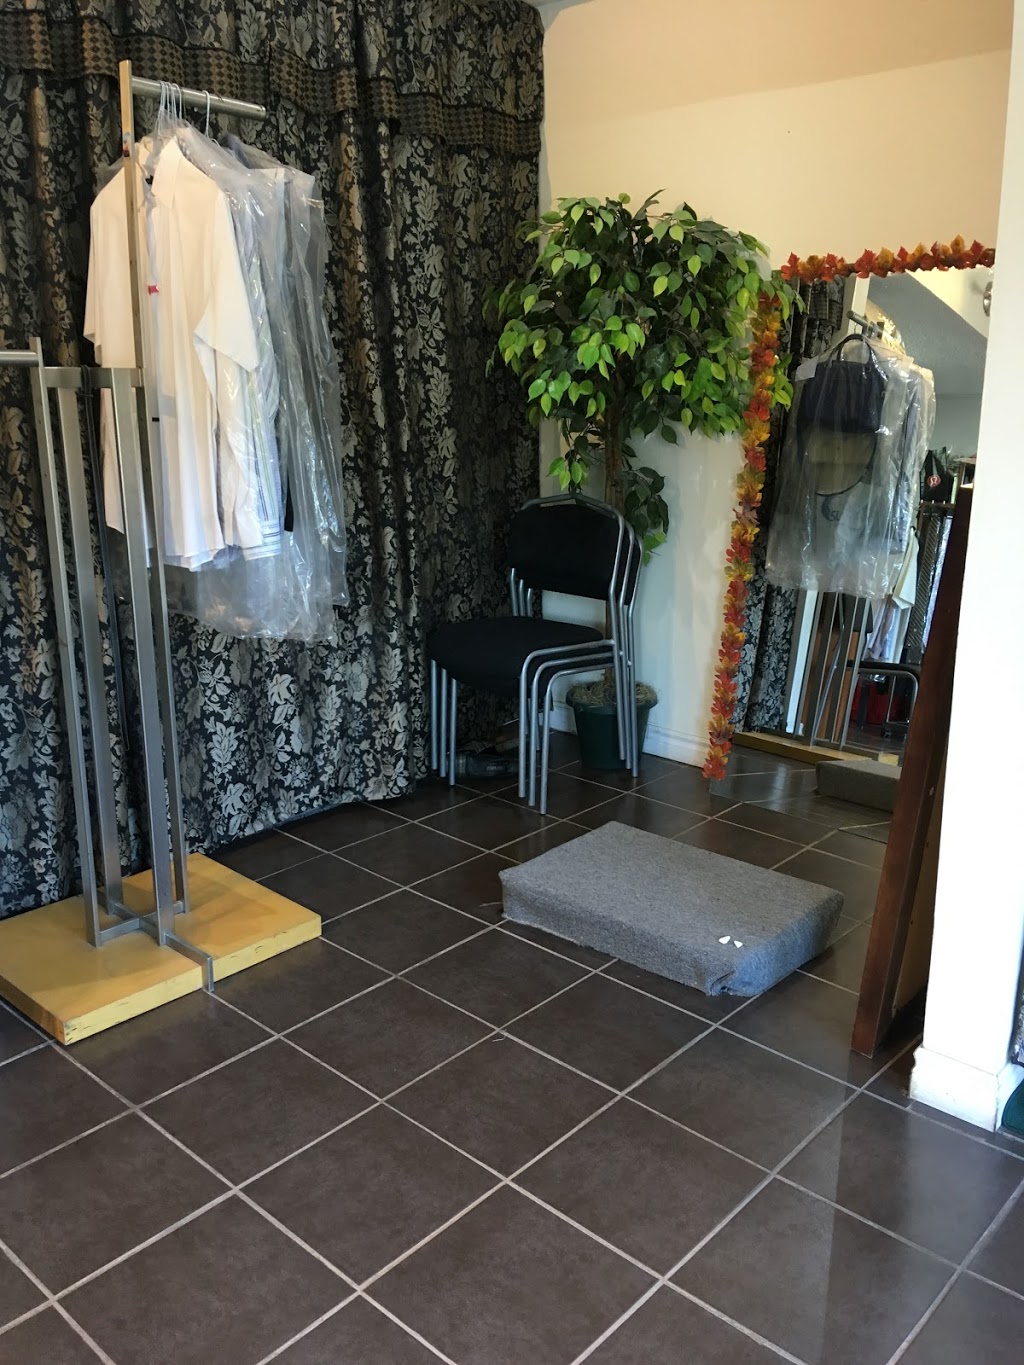 North York Custom Tailoring and Alterations | point of interest | 4632 Yonge St, North York, ON M2N 5M1, Canada | 4162180721 OR +1 416-218-0721